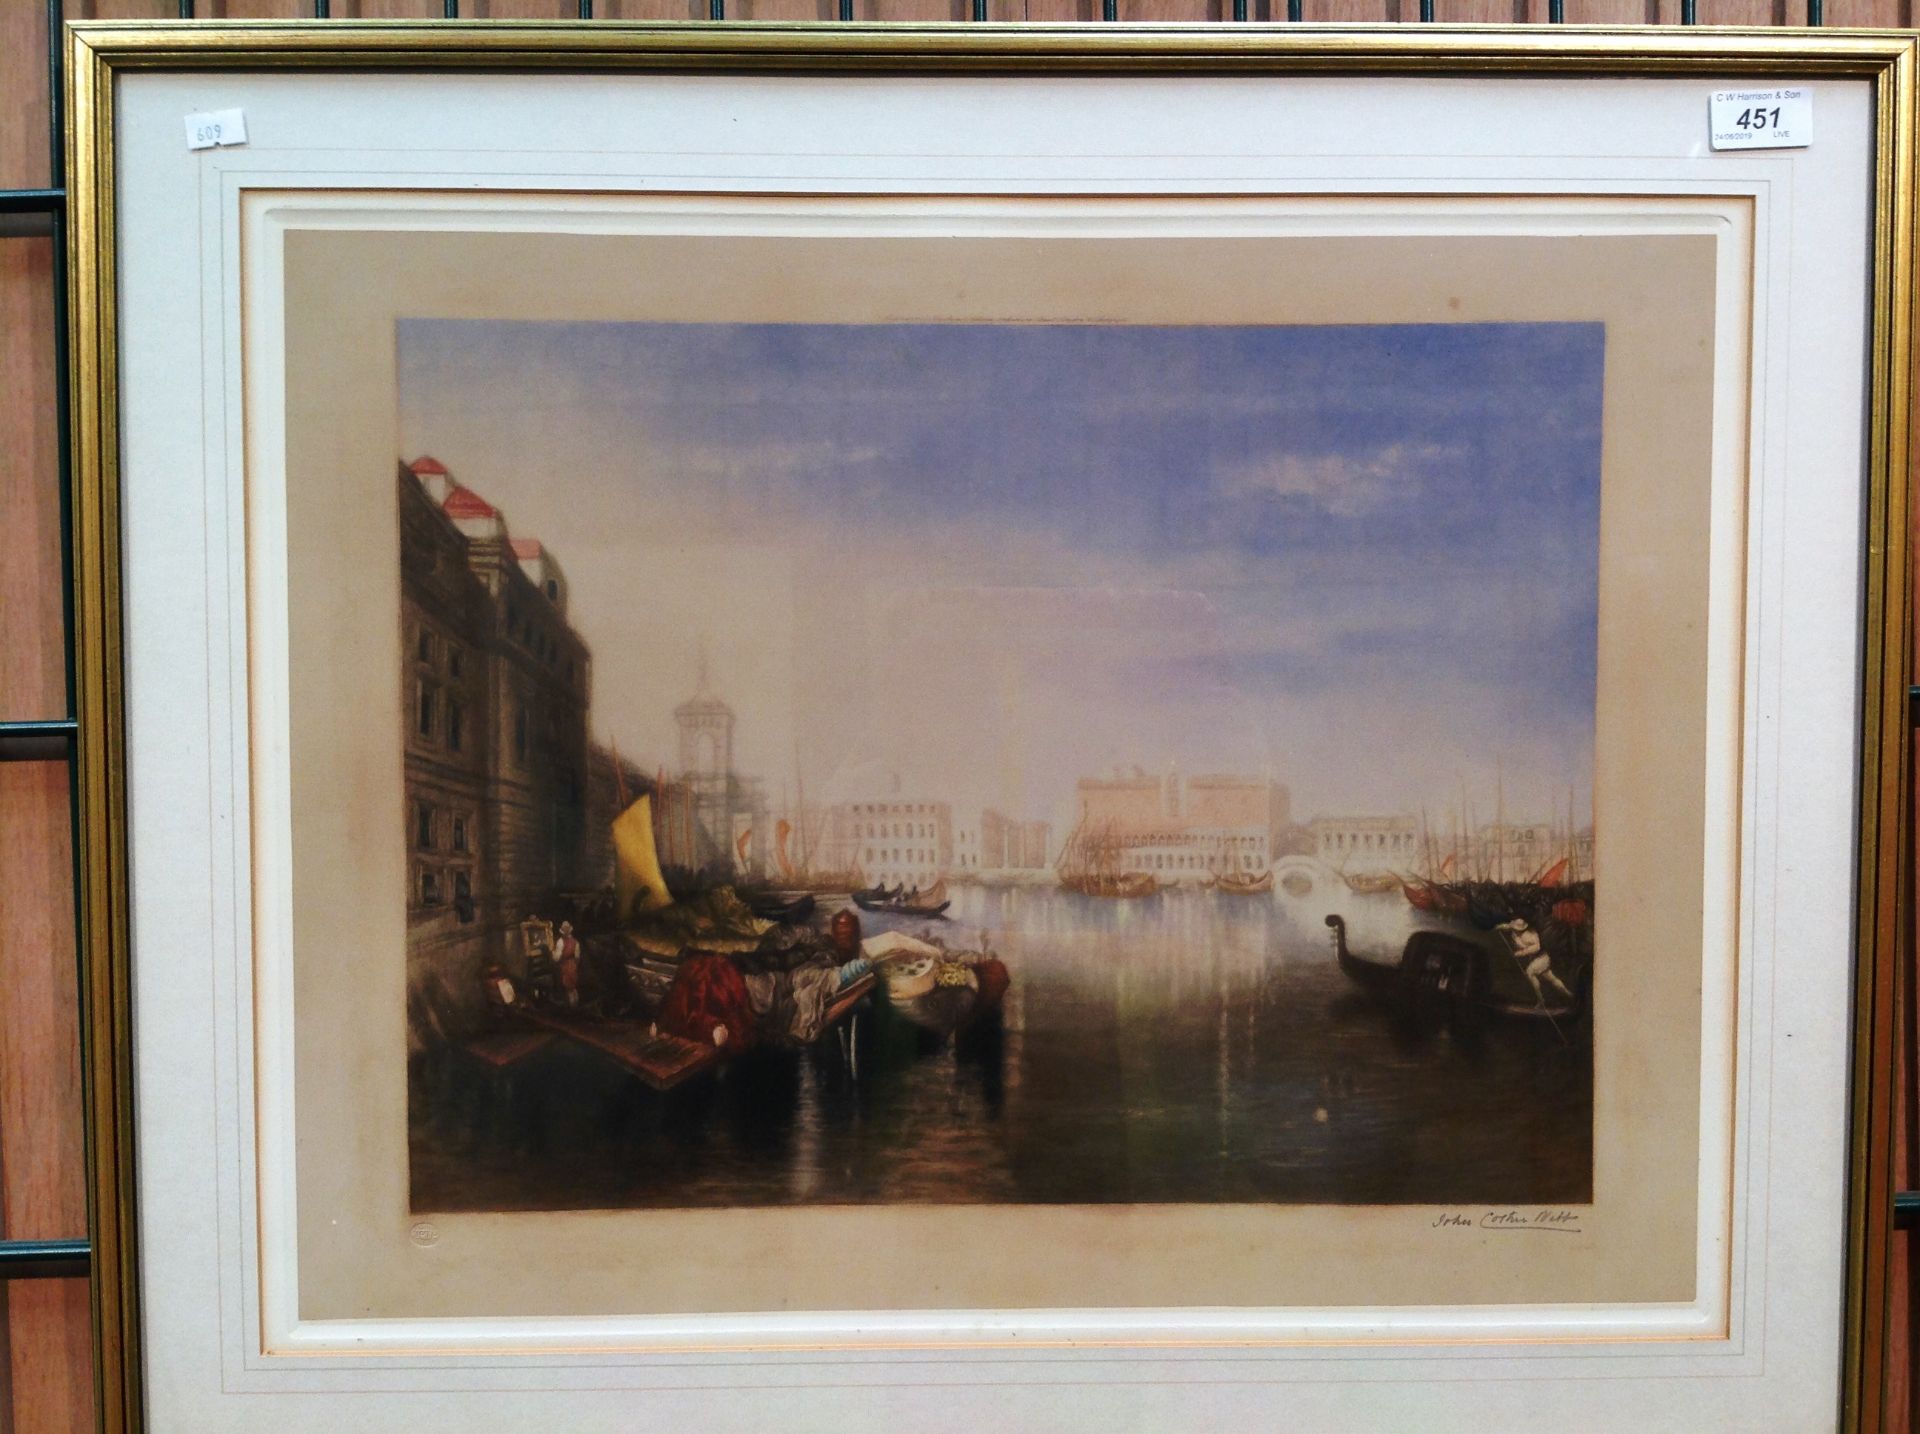 John Cother Webb 1855-1927 framed print 'Italianate Scene' 33 x 45cm facsimile signed in pencil by